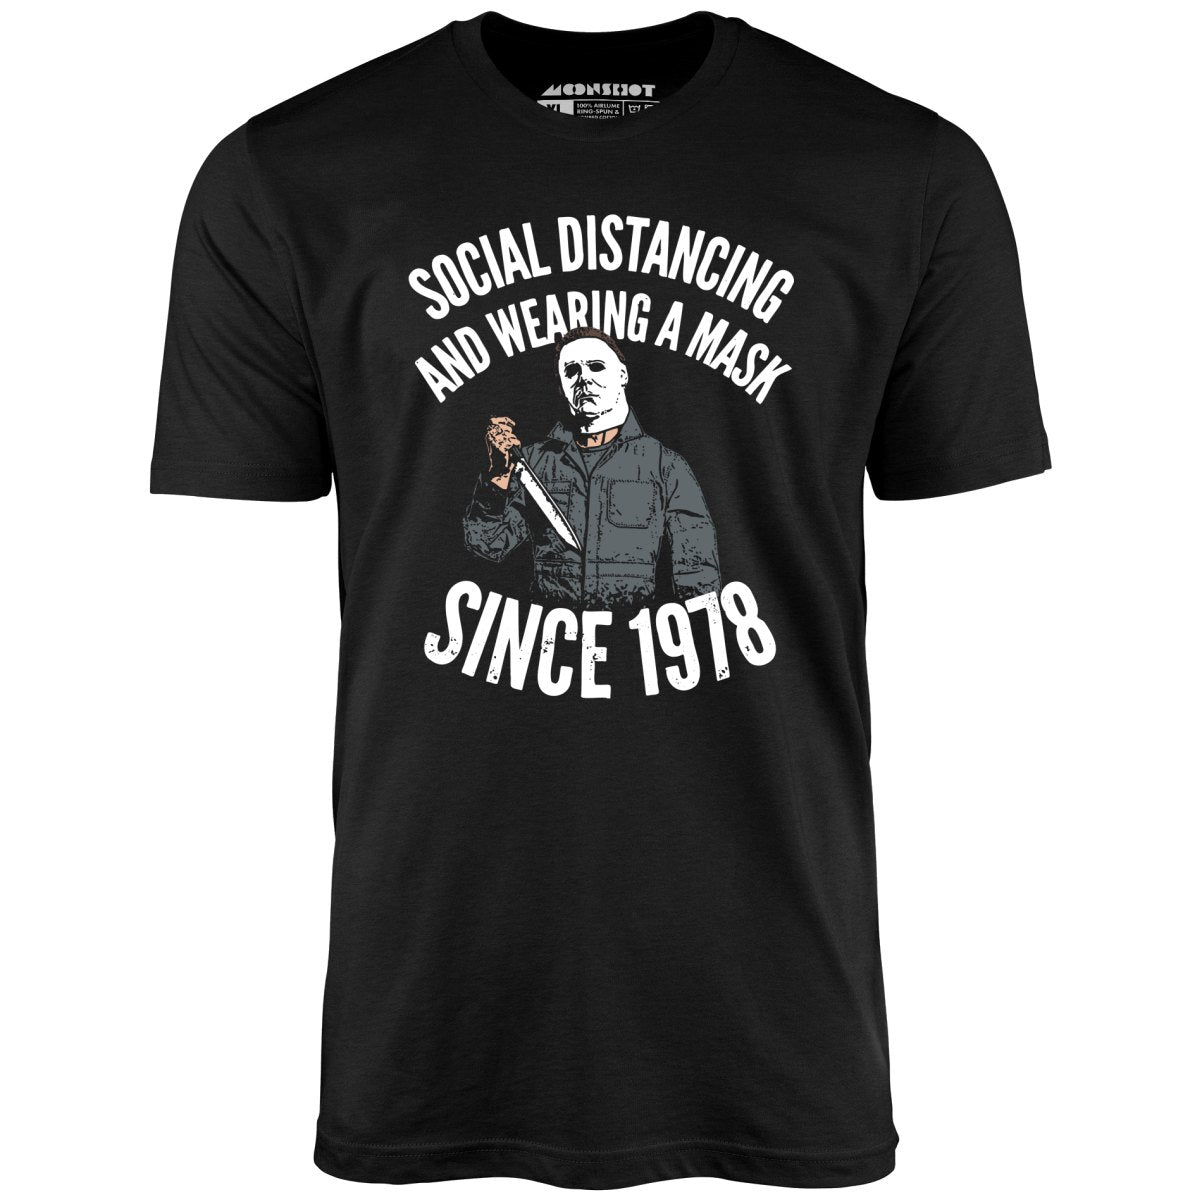 Social Distancing and Wearing a Mask Since 1978 - Unisex T-Shirt